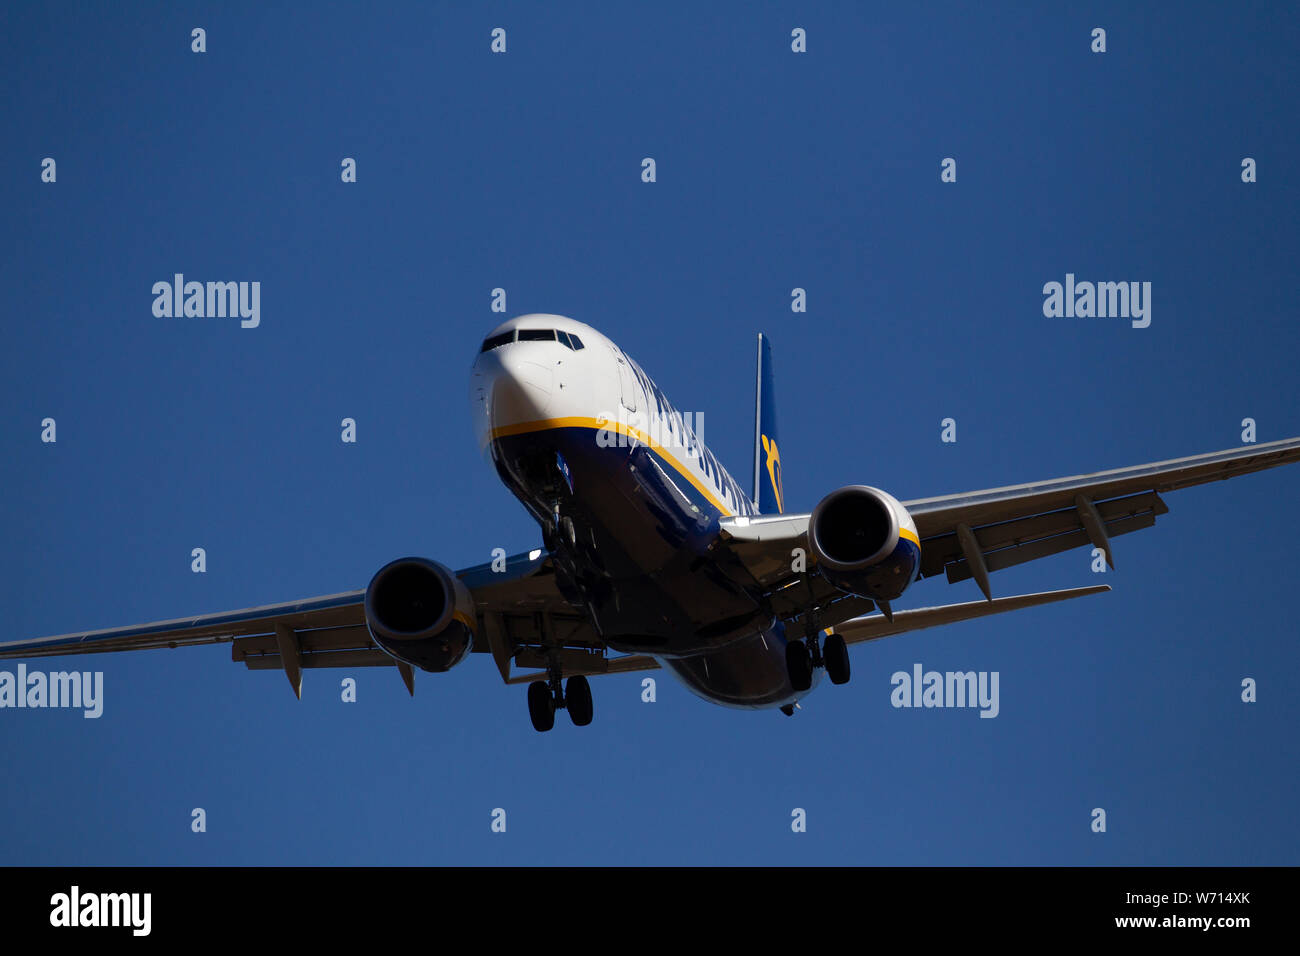 Close up of a passenger plane coming in for landing Stock Photo